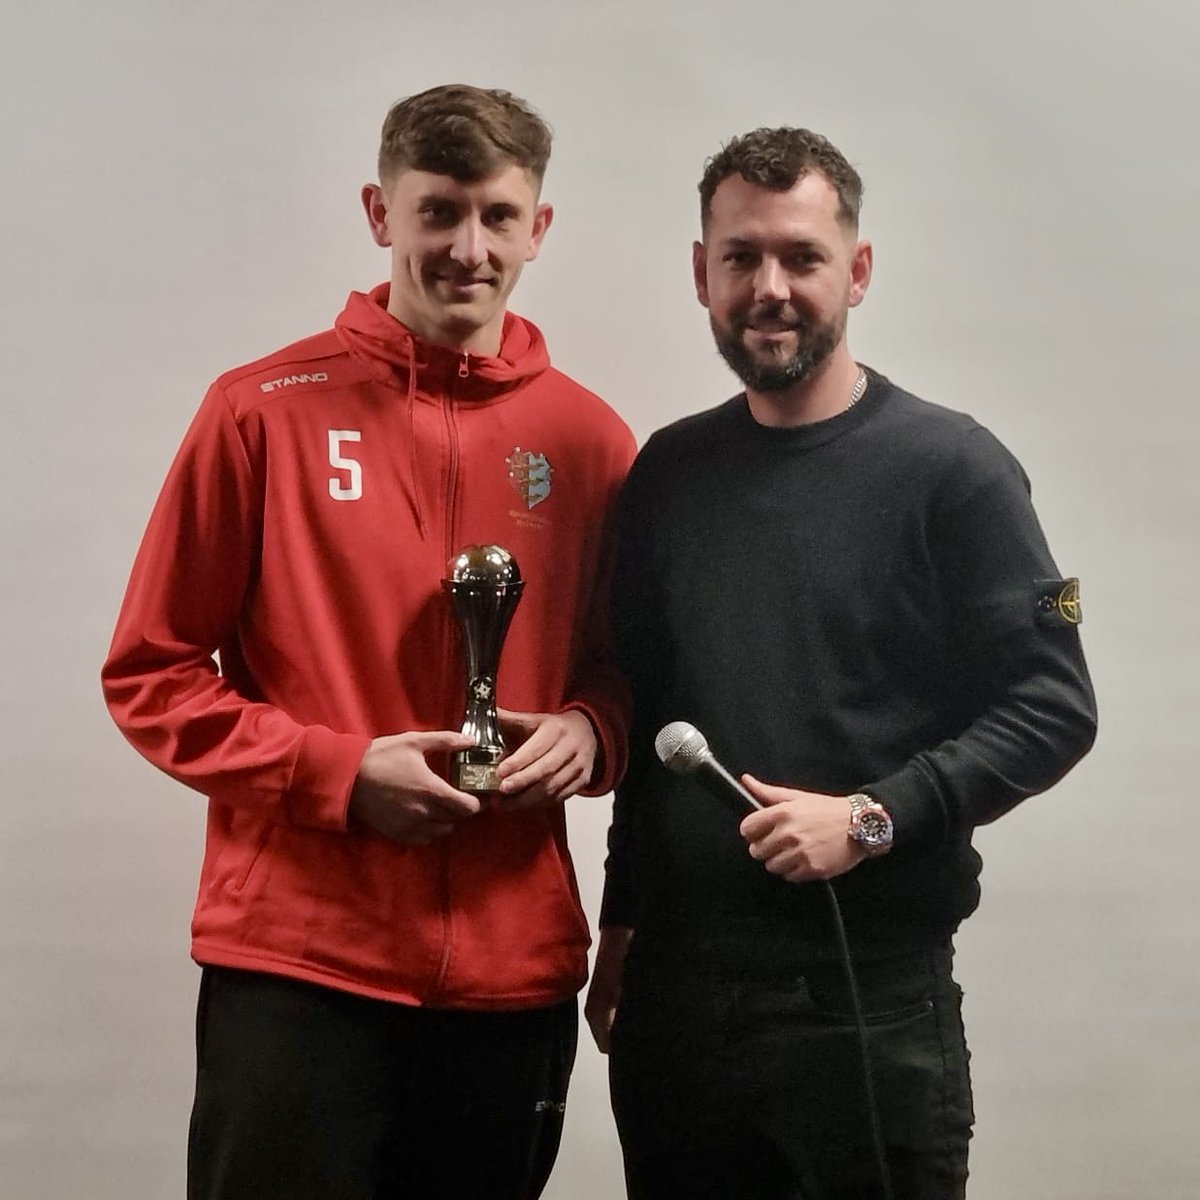 𝗔𝗪𝗔𝗥𝗗𝗦 𝗡𝗜𝗚𝗛𝗧! 🏅 Jake Thompson was a multi-award winner on Saturday evening, taking the Managers, Players and Supporters accolades 🏅🏅🏅 He played in every minute of our 46 matches, keeping 16 clean sheets and chipping in with 8 goals. A great season from JT 👏